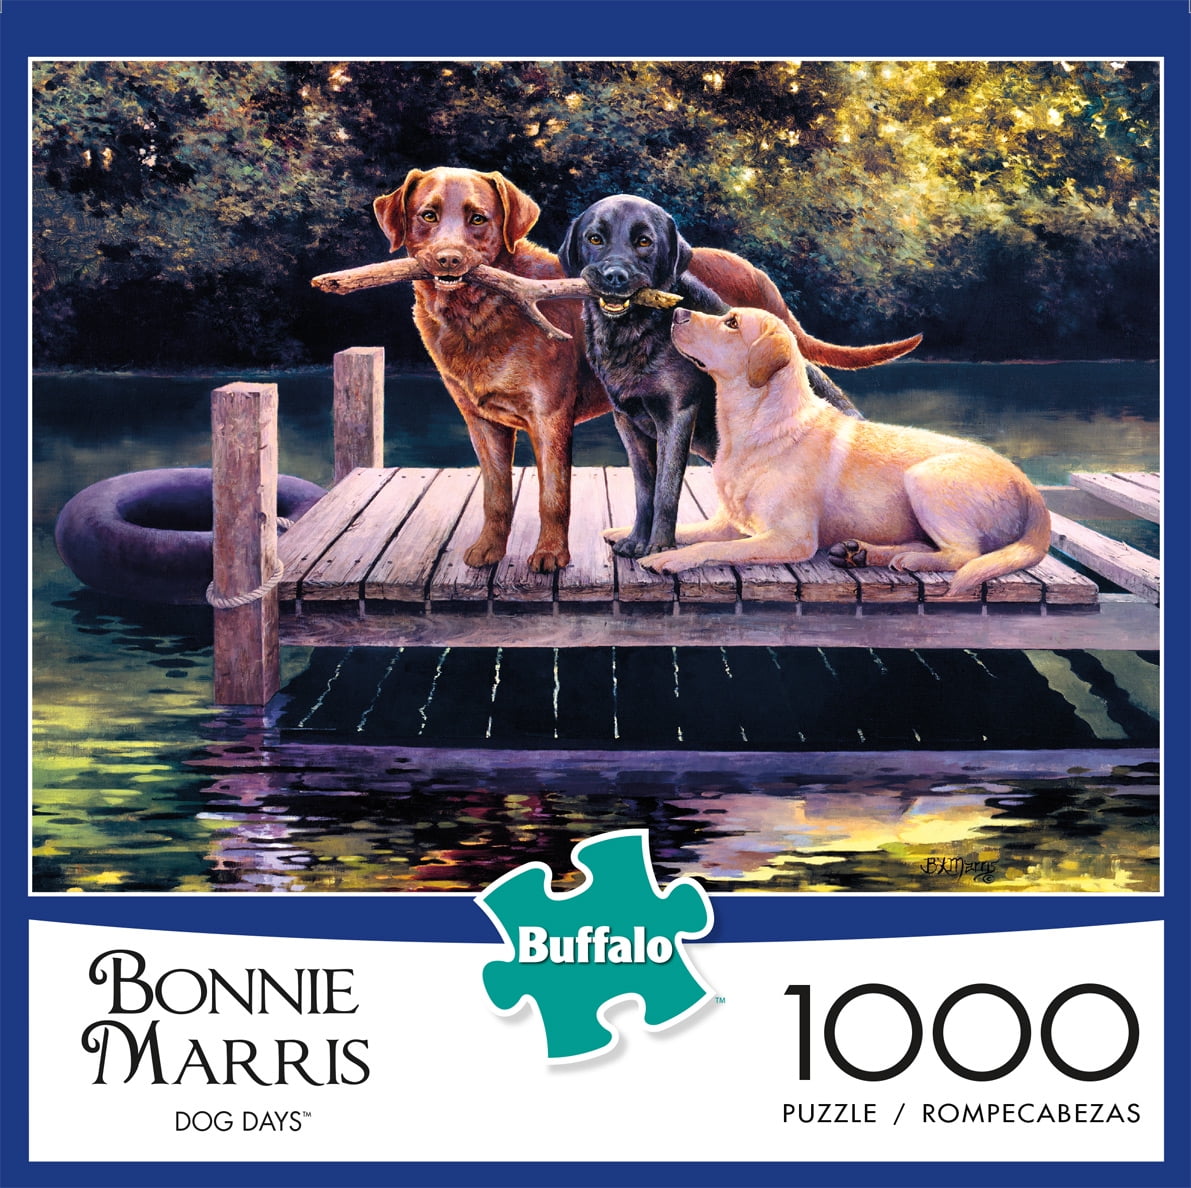 DOGS JUST LABS BRAND NEW 39781 1000 PIECE JIGSAW PUZZLE 